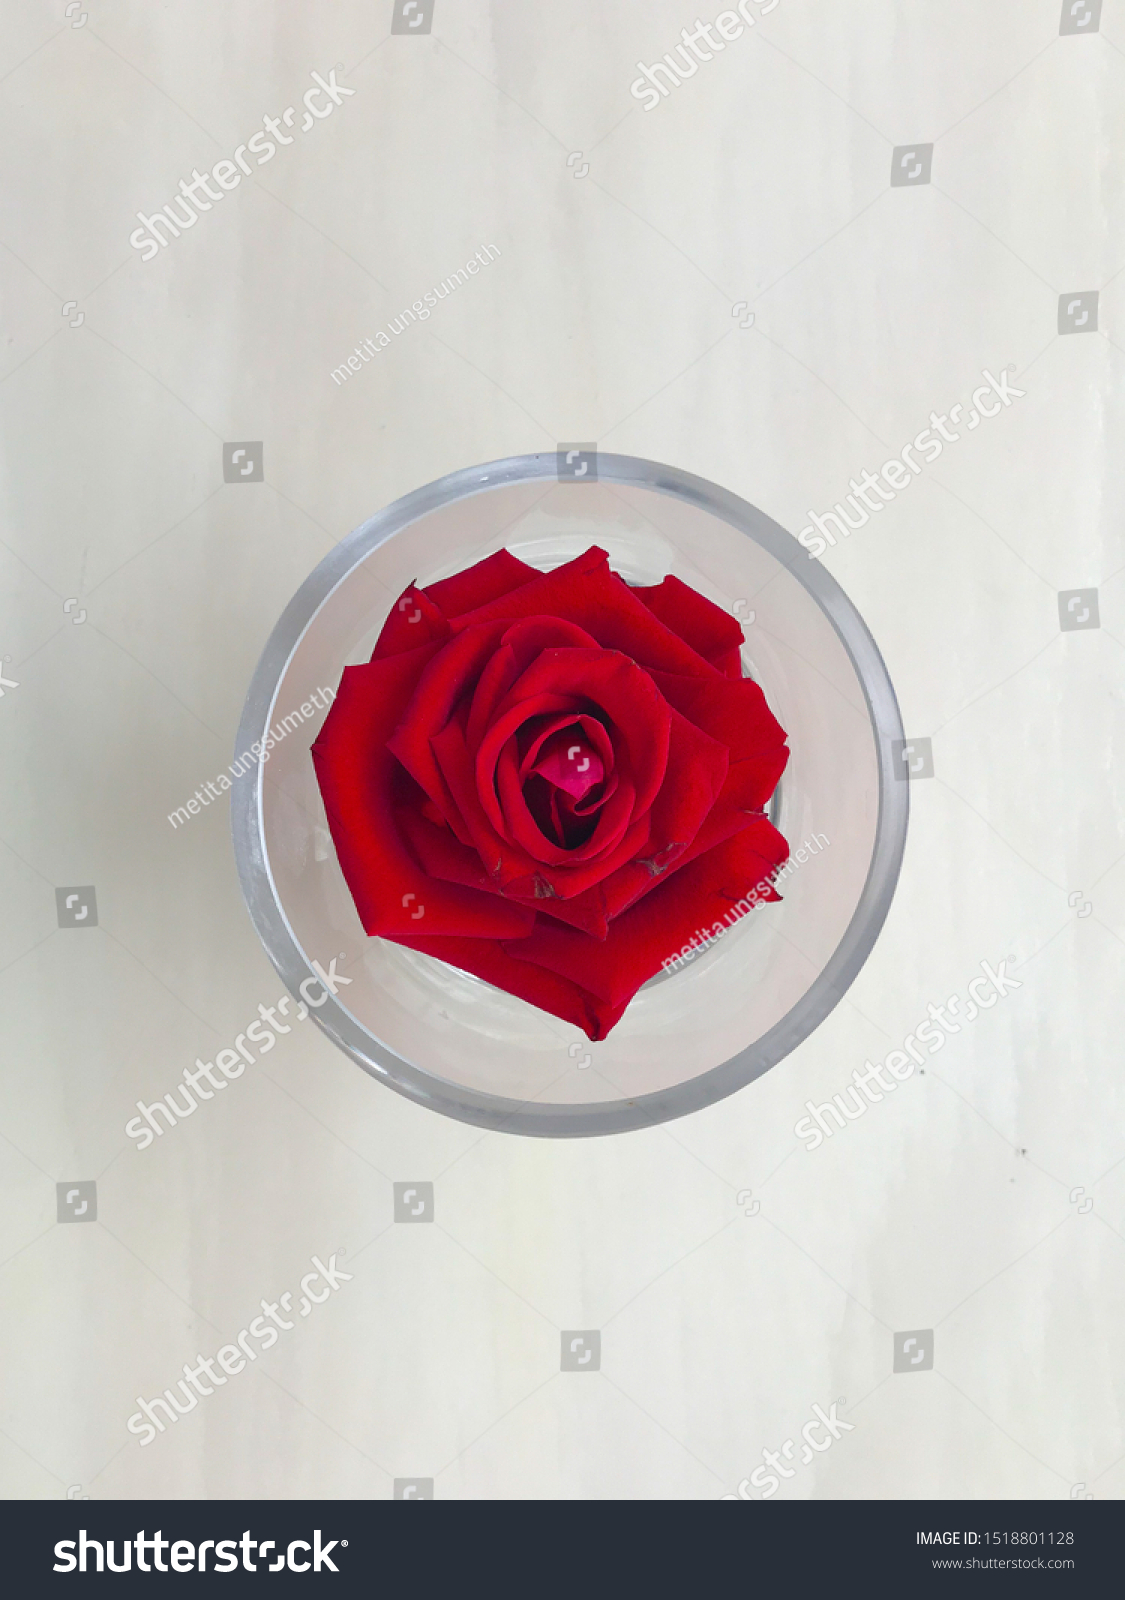 Download Top View Rose Flower Circle Jar Stock Photo Edit Now 1518801128 Yellowimages Mockups